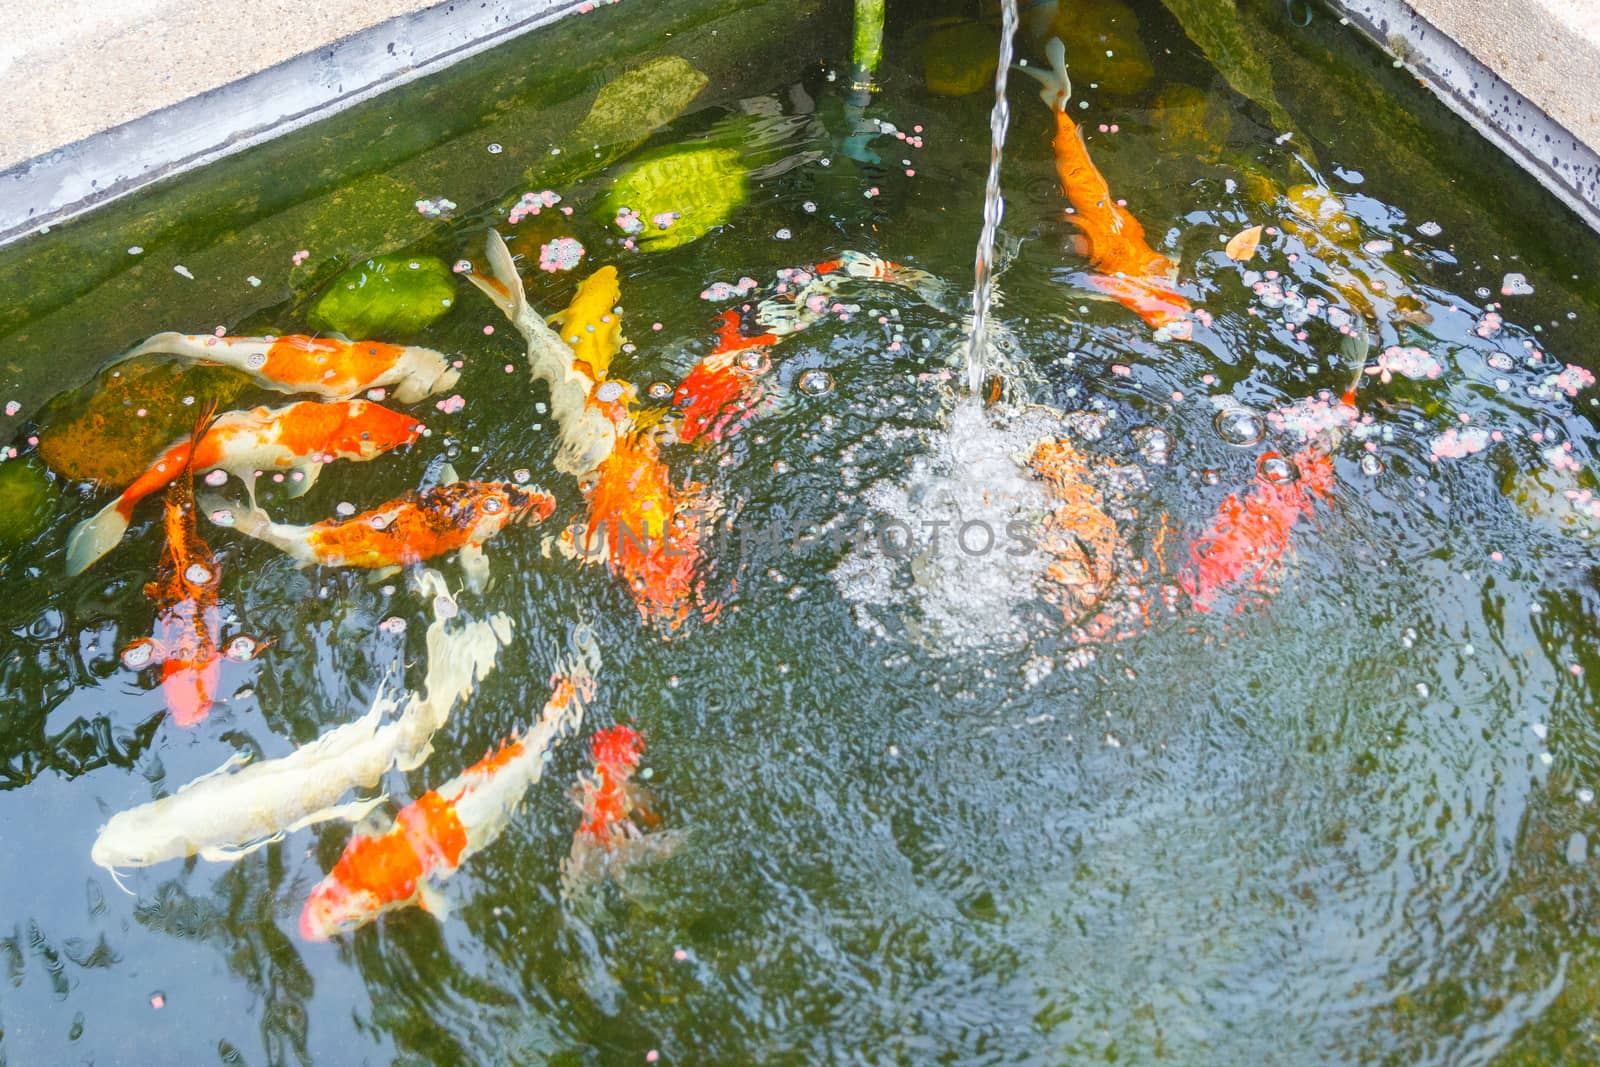 Carps in pond with spring.